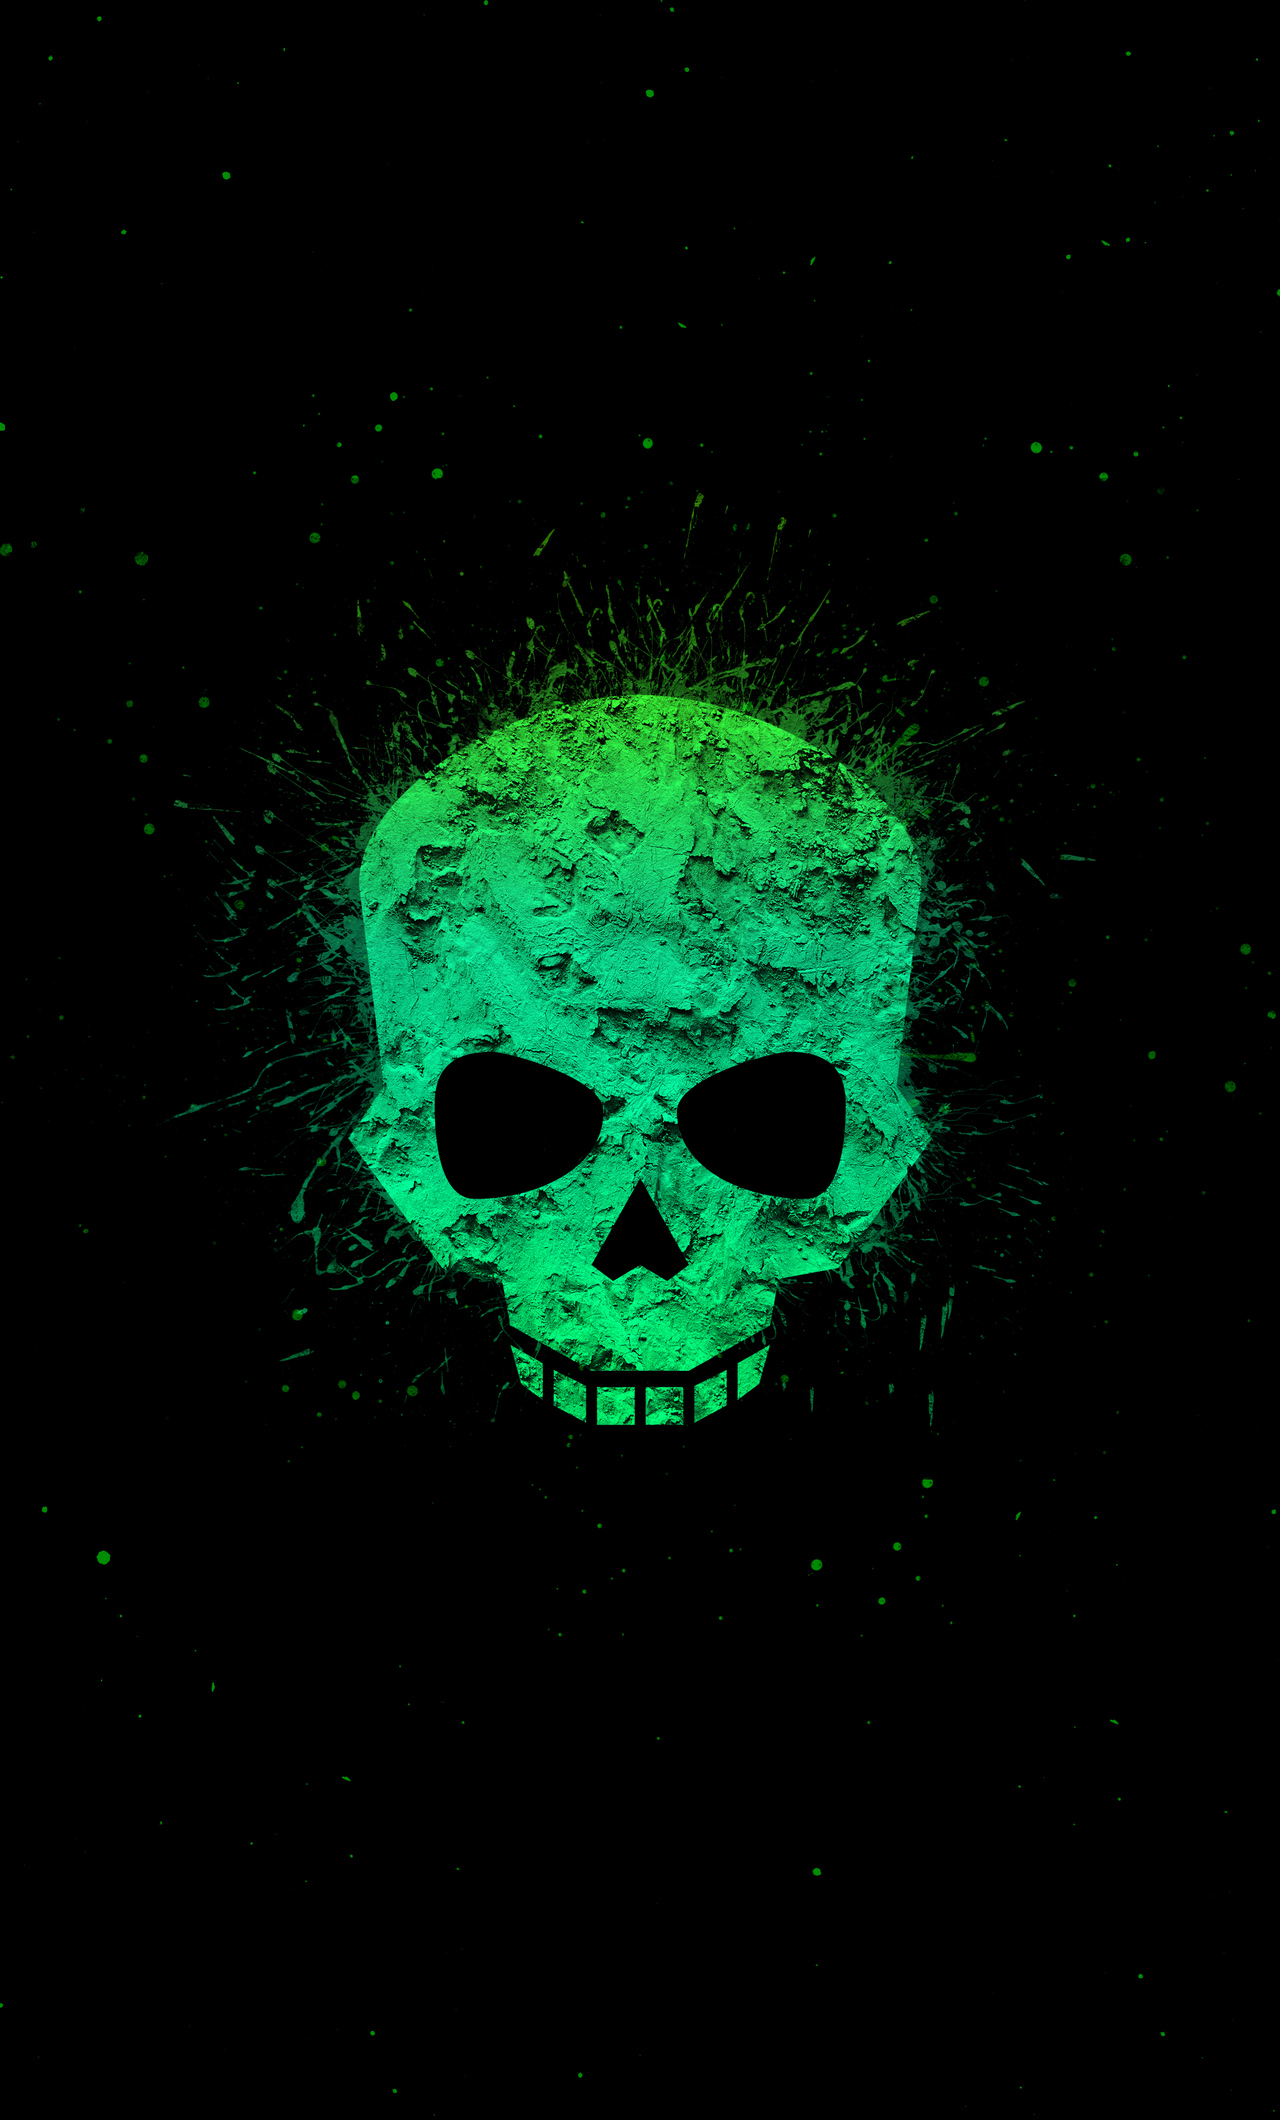 A green skull on black background with stars - Neon green, skull